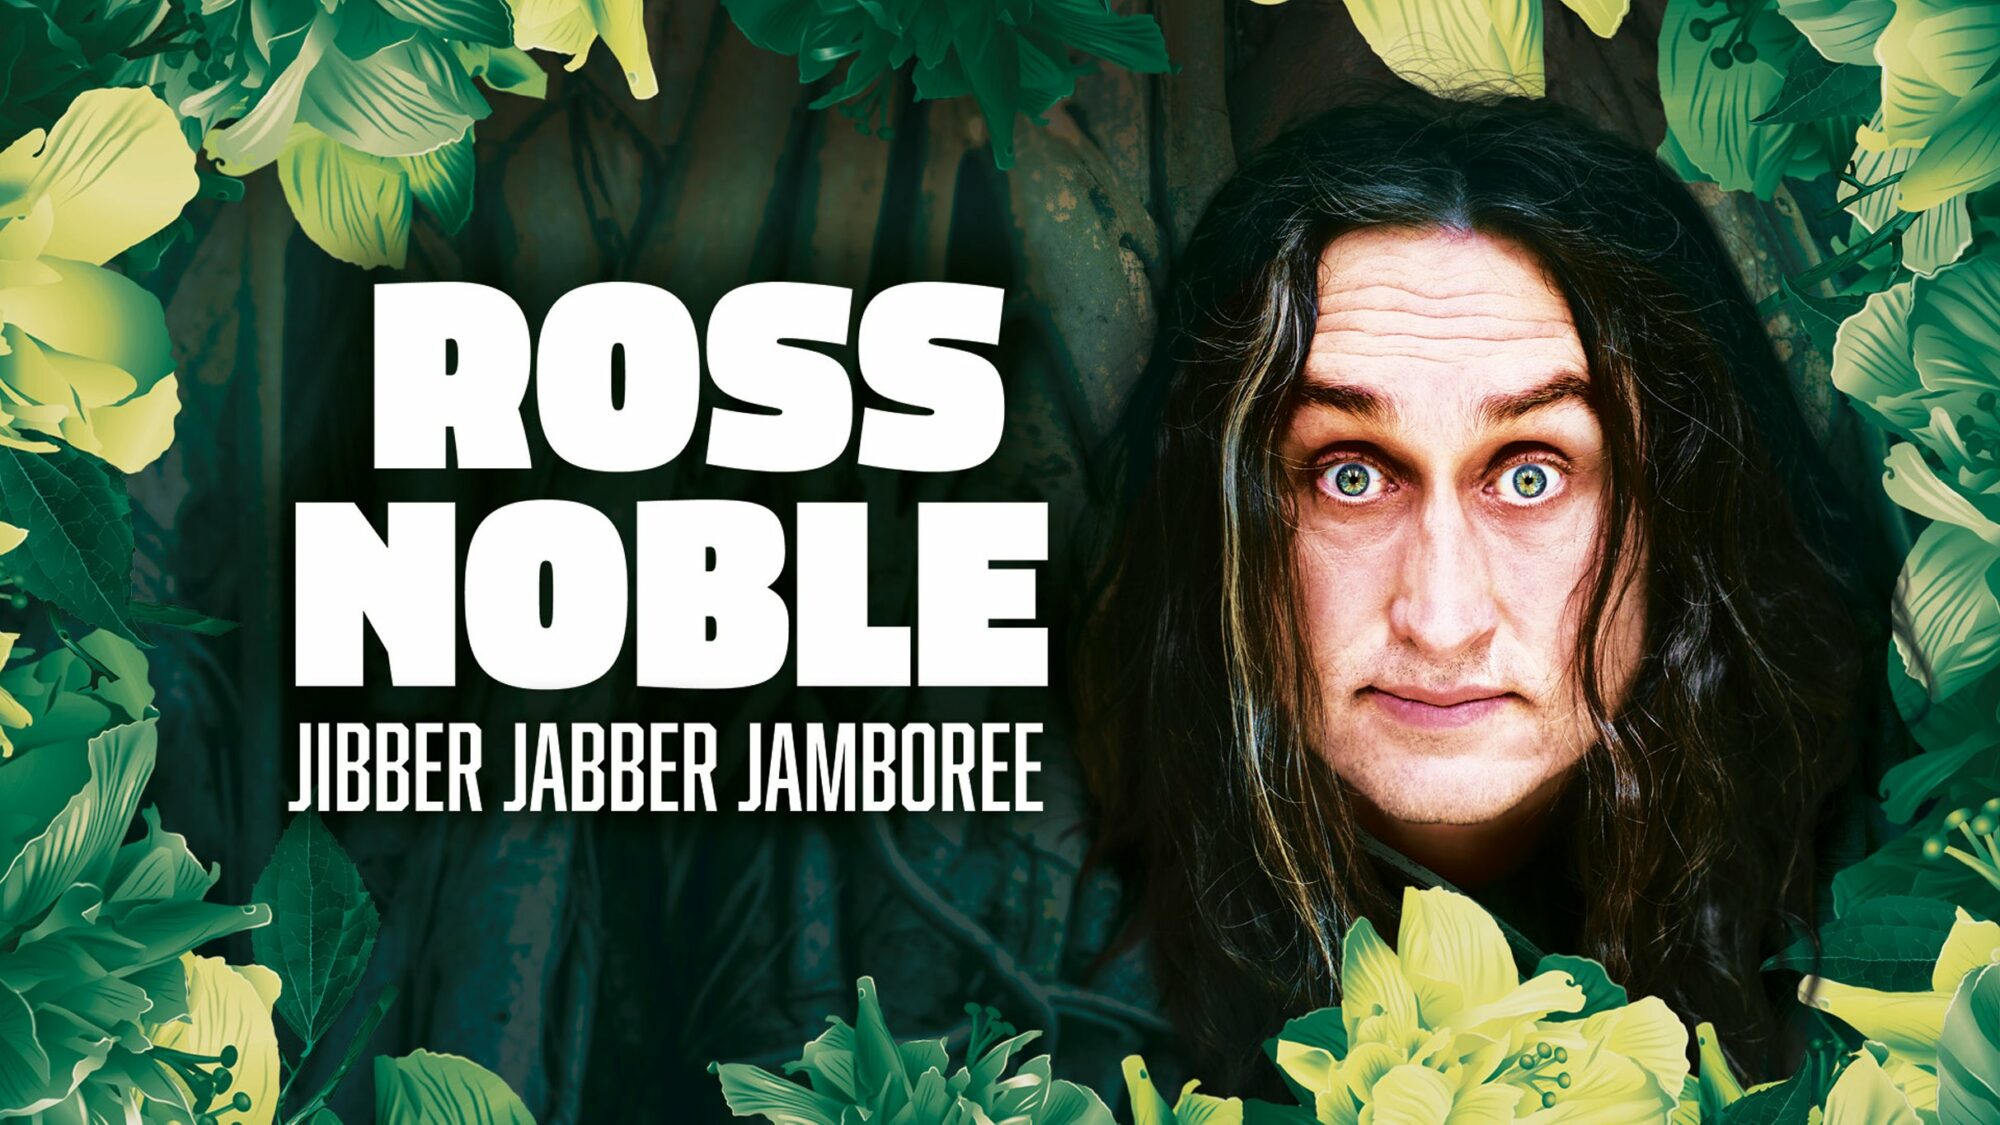 Ross Noble: JIBBER JABBER JAMBOREE at Middlesbrough Town Hall, Middlesbrough